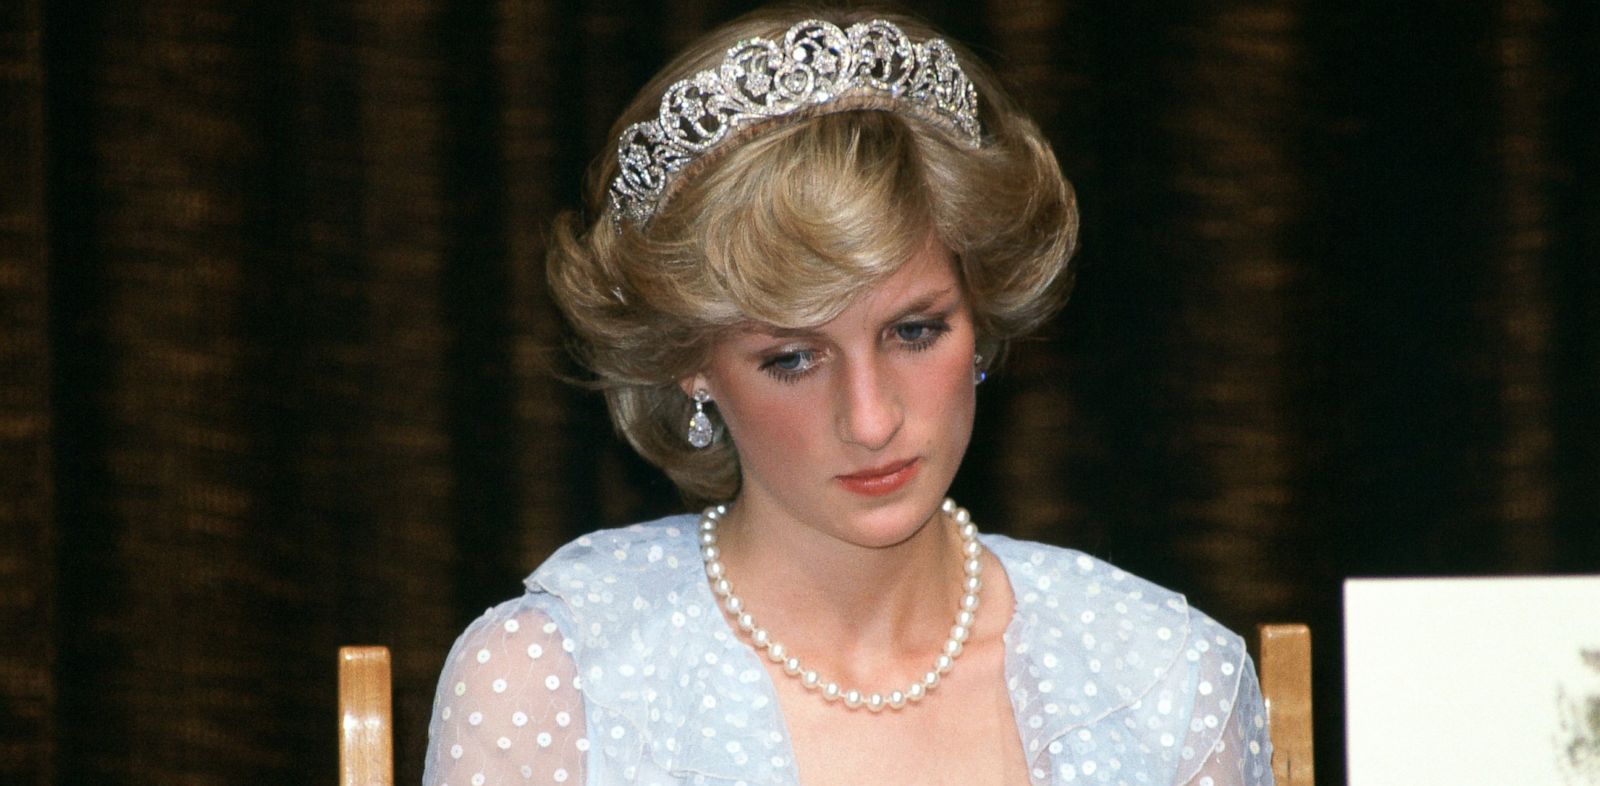 Princess Diana's Butler Reveals the Heartbreaking Last Words She Said to Him Before She Died